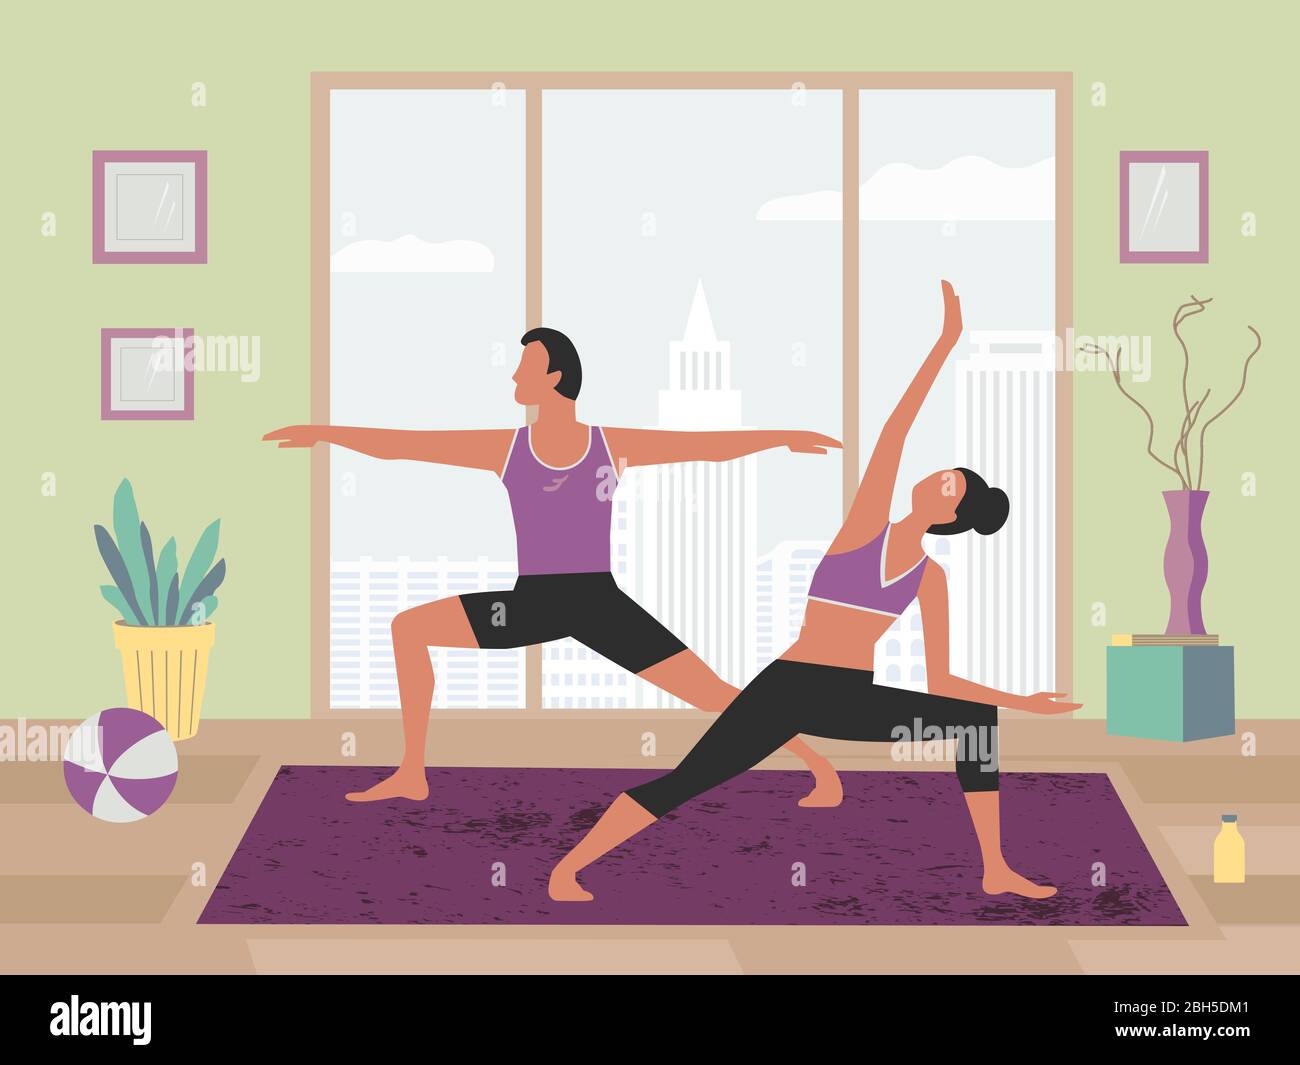 Couple exercising yoga at home flat color vector. Stay home yoga meditation practice cartoon. Breathing exercise workout background. Healthy lifestyle Stock Vector